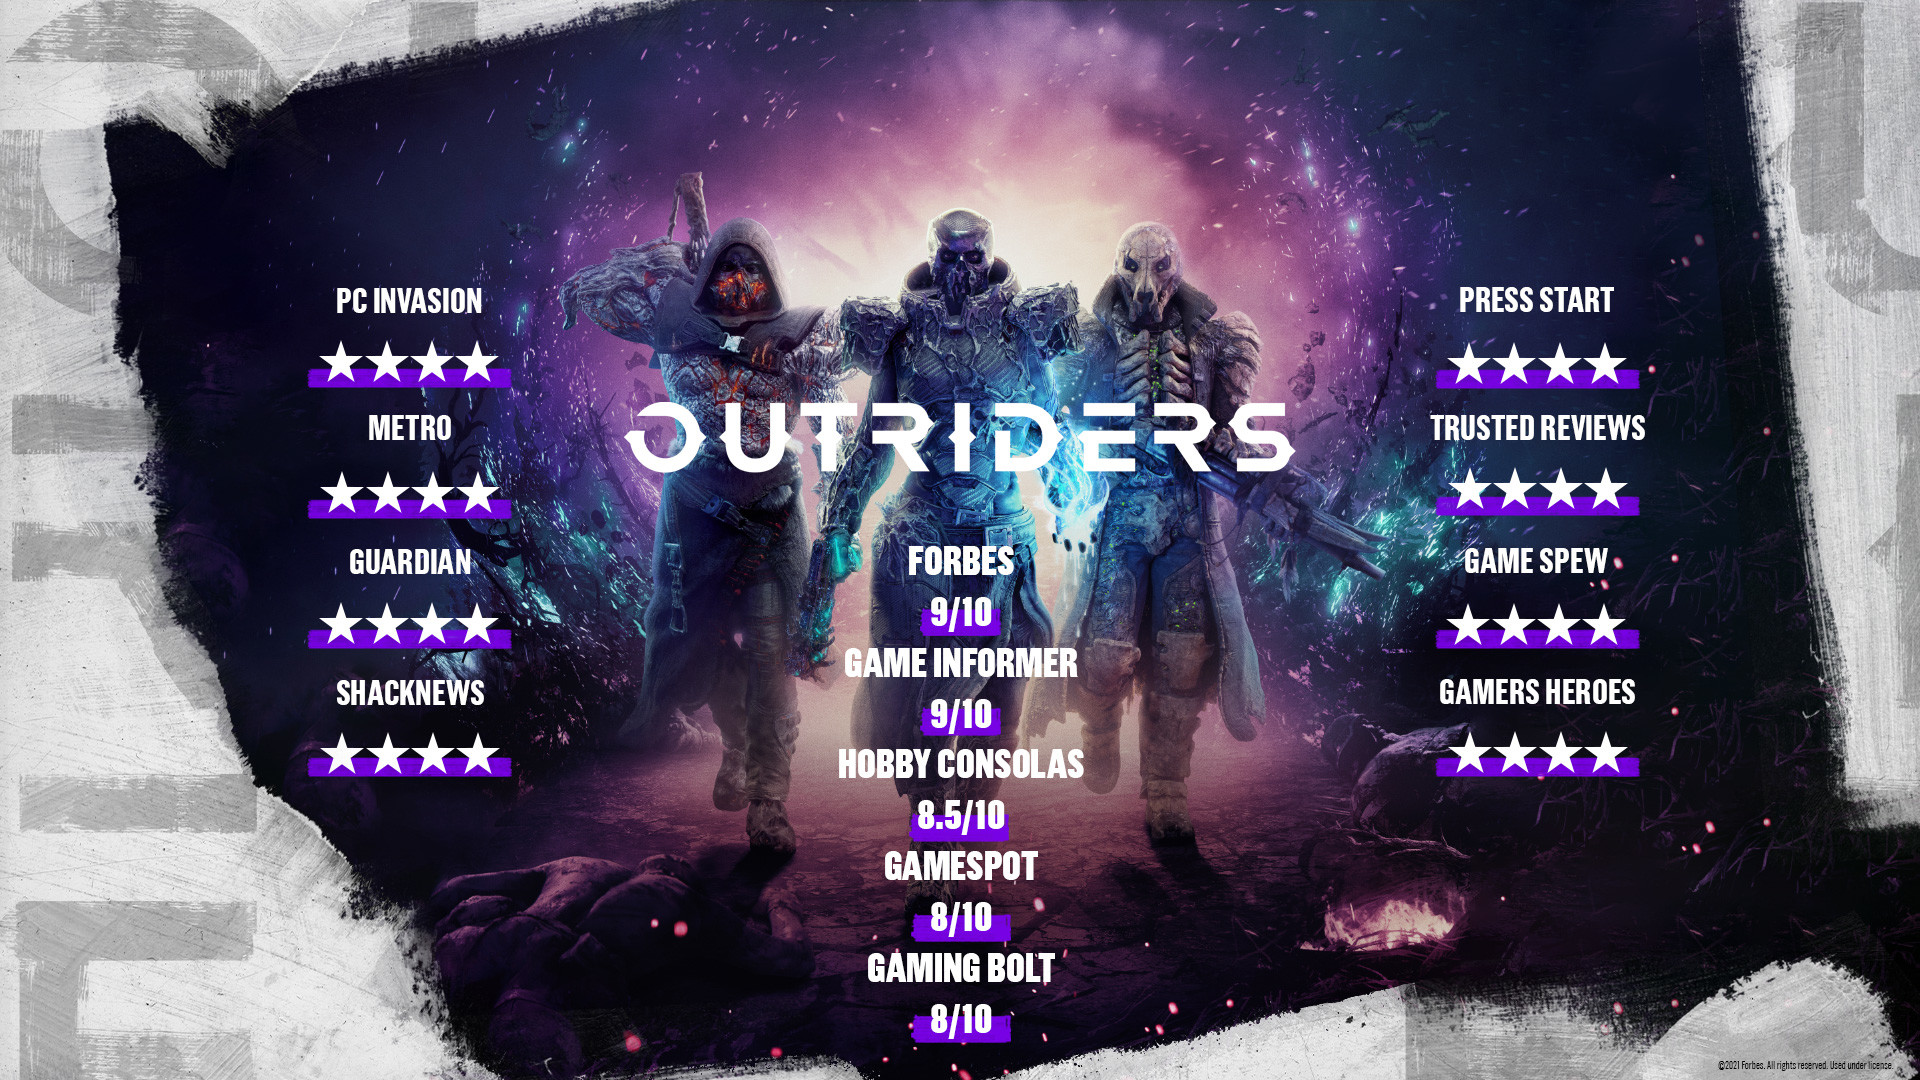 OUTRIDERS on Steam